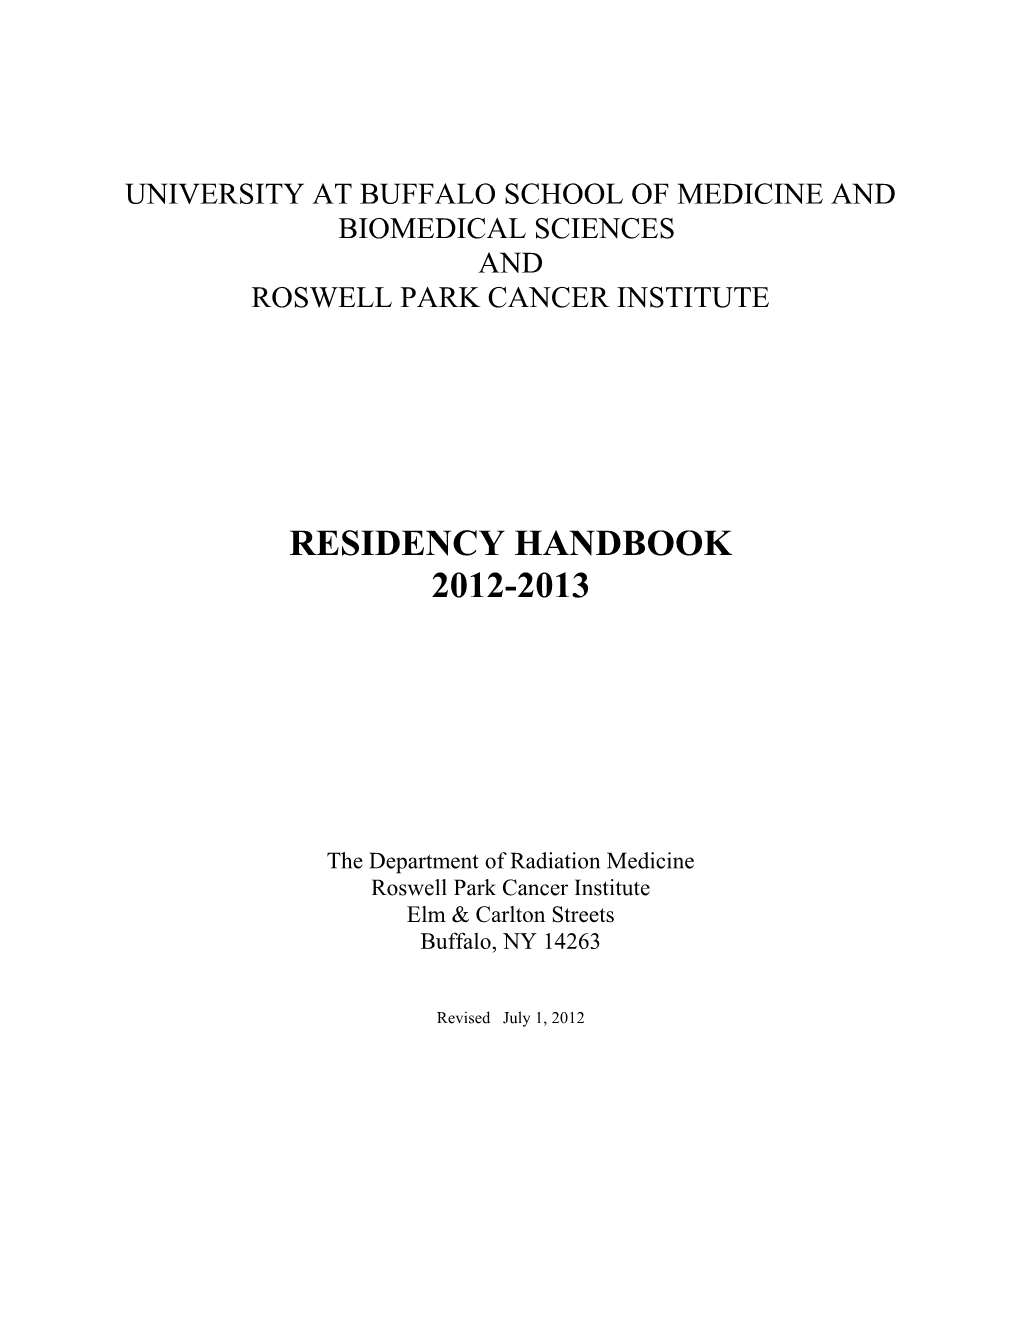 University at Buffalo School of Medicine and Biomedical Sciences And